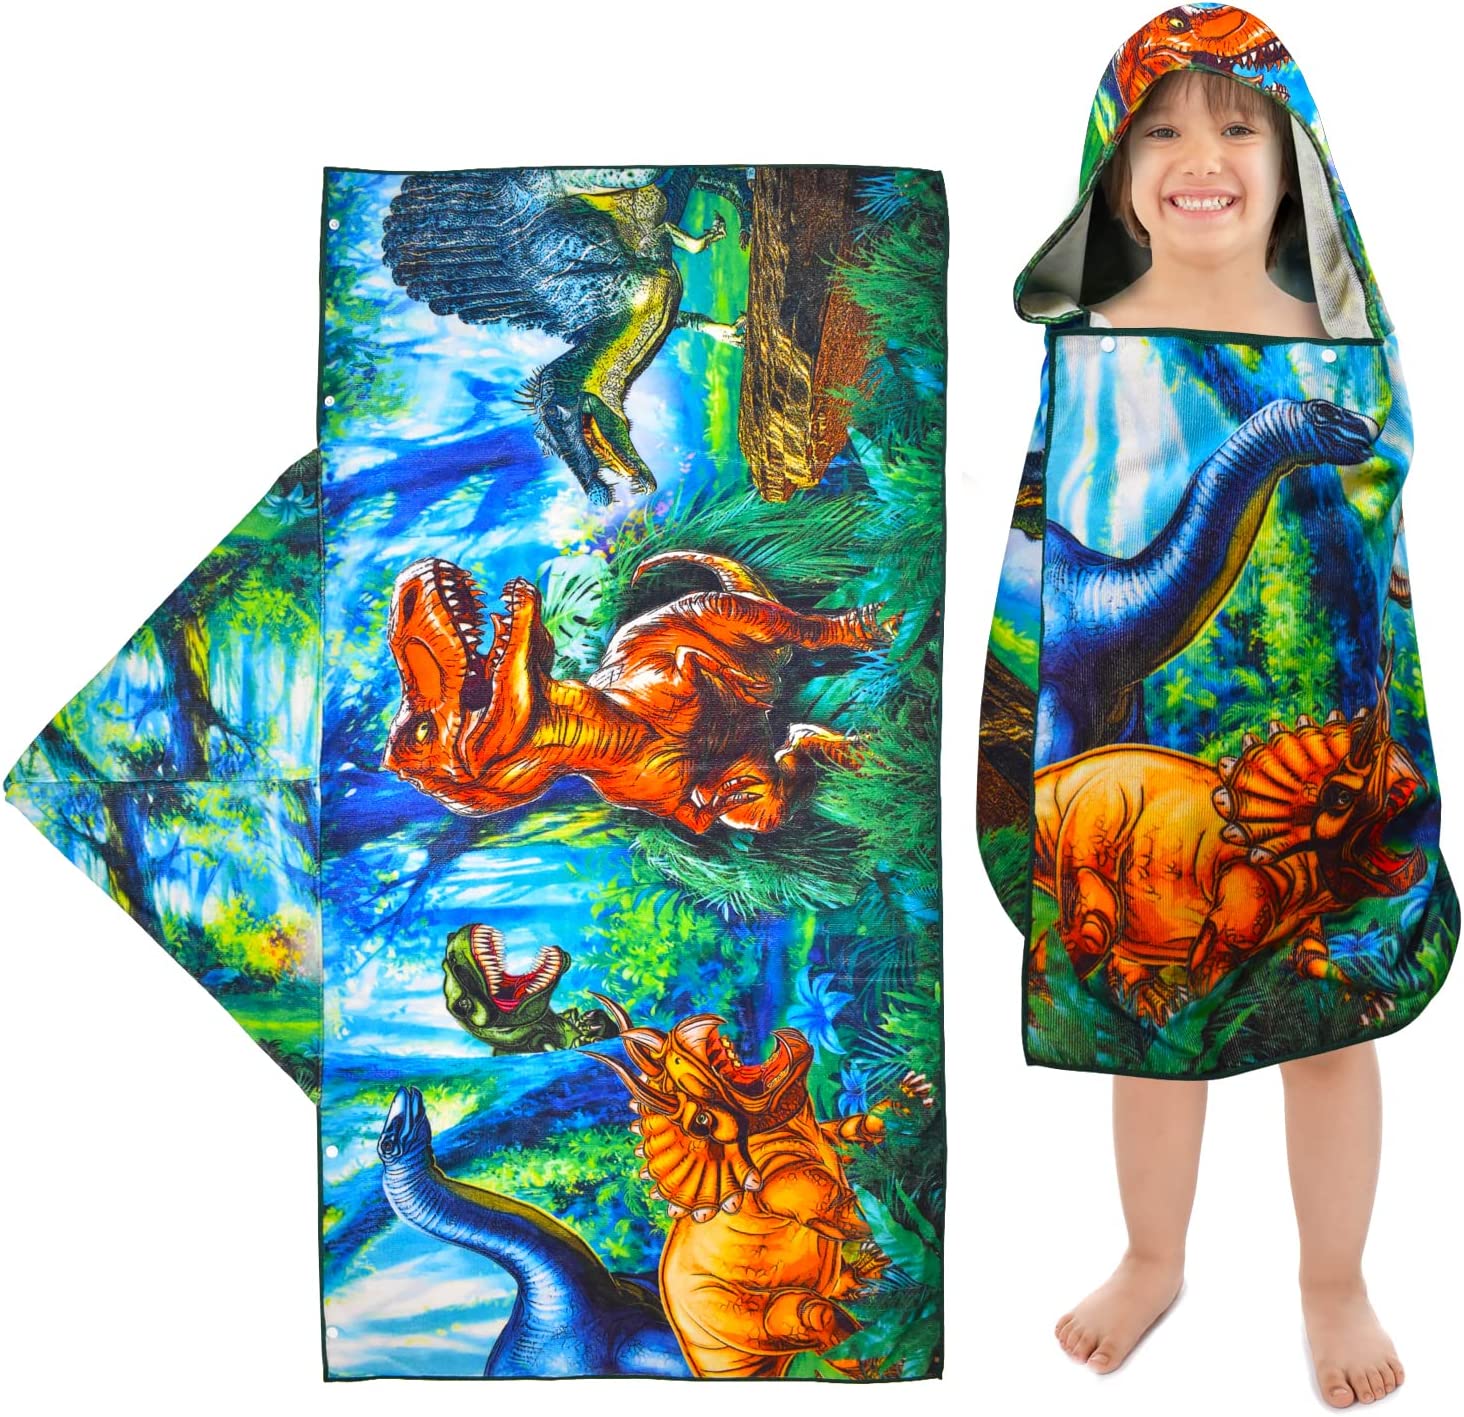 Beach Towel - Microfiber Beach Towels for Kids, Great for Beach, Bath, Swimming, Sports, Camping, Quick Fast Dry Sand Proof Super Soft Breathable and Lightweight Beach Towel (Dinosaur, Hooded Towel)